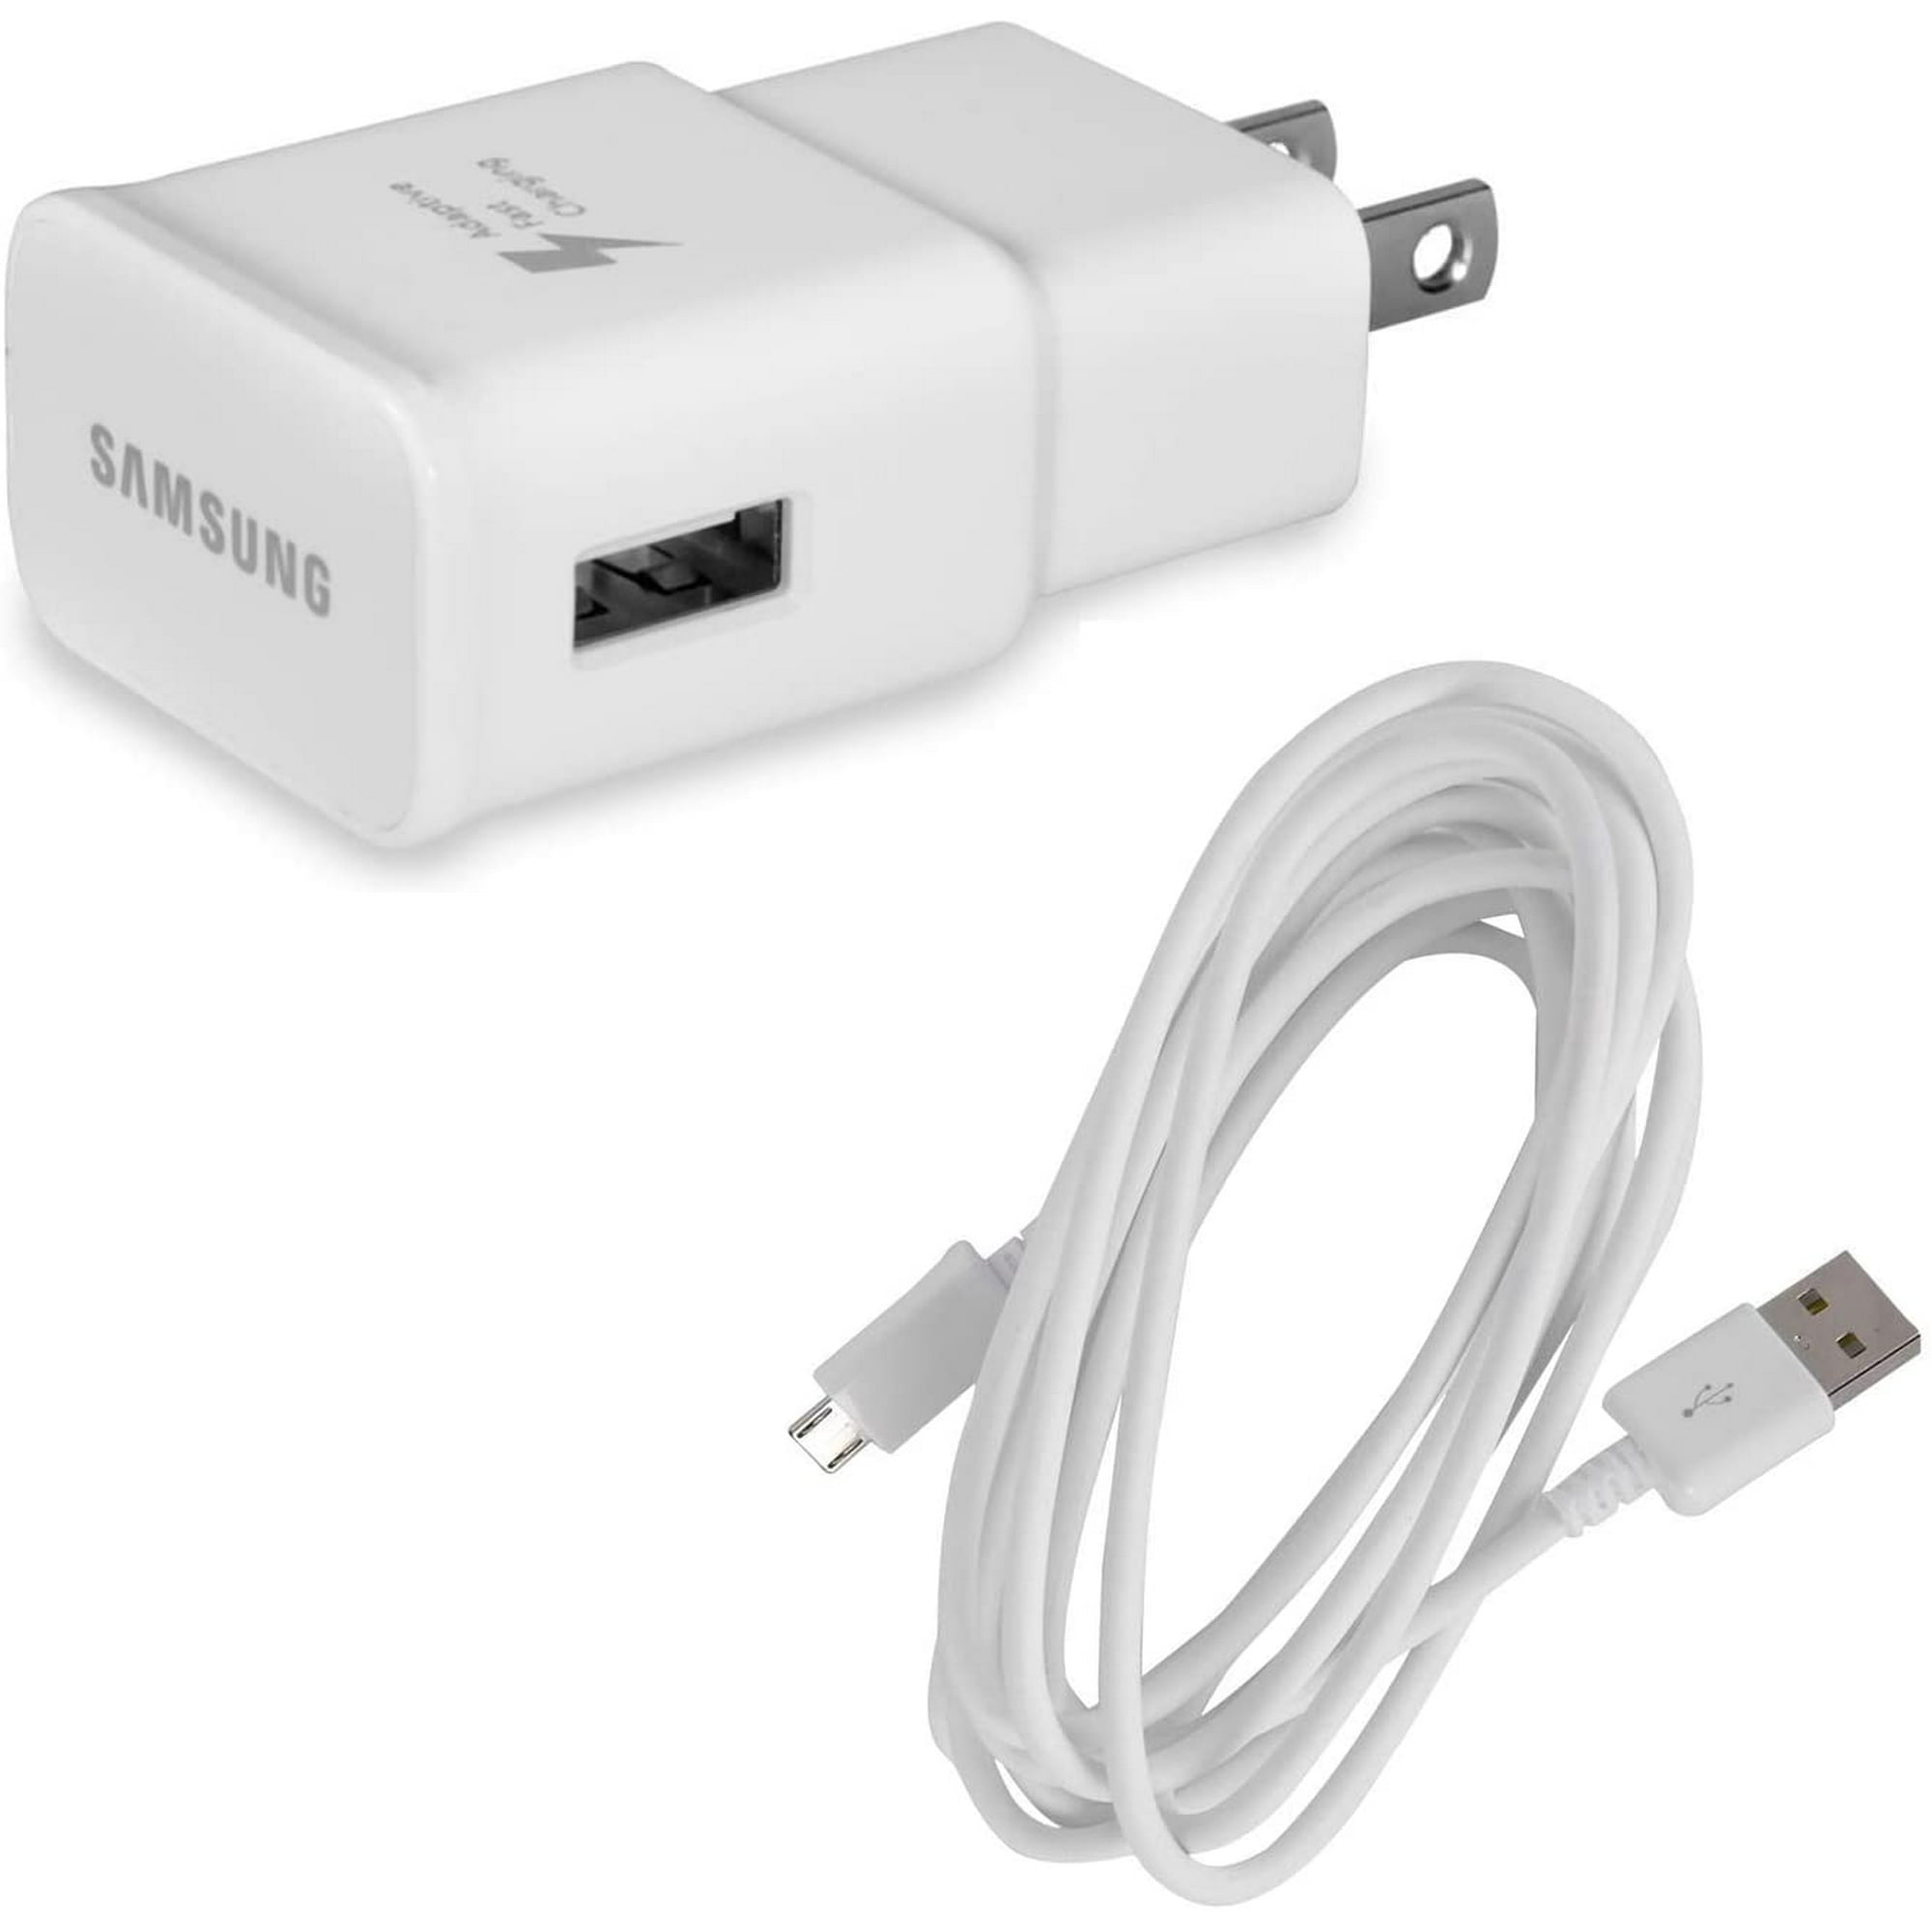 Samsung Fast Charger EP-TA20JWE and 3 Meter Micro USB Cable for Galaxy S7 /  S7 Edge / S6 / S6 Edge/Note 5 / Note 4 / J2 | Walmart Canada